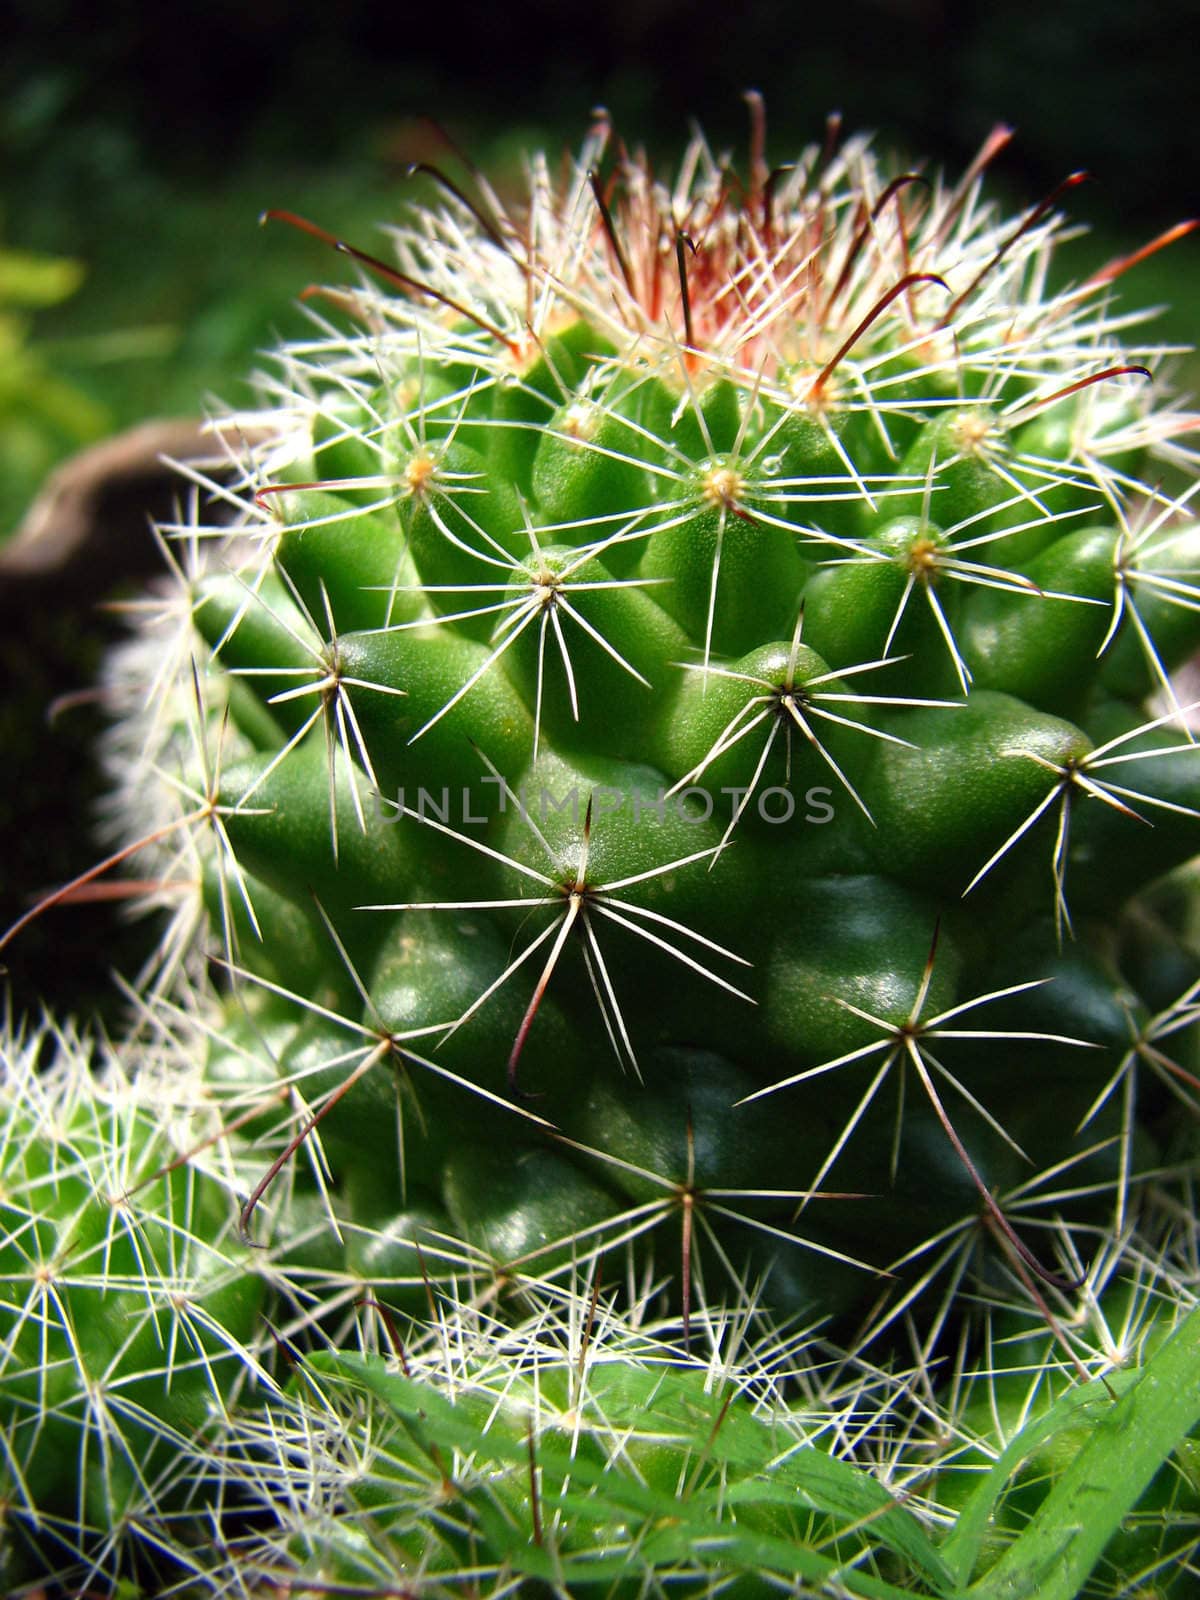 A closeup detailed view of a small cactus plant.